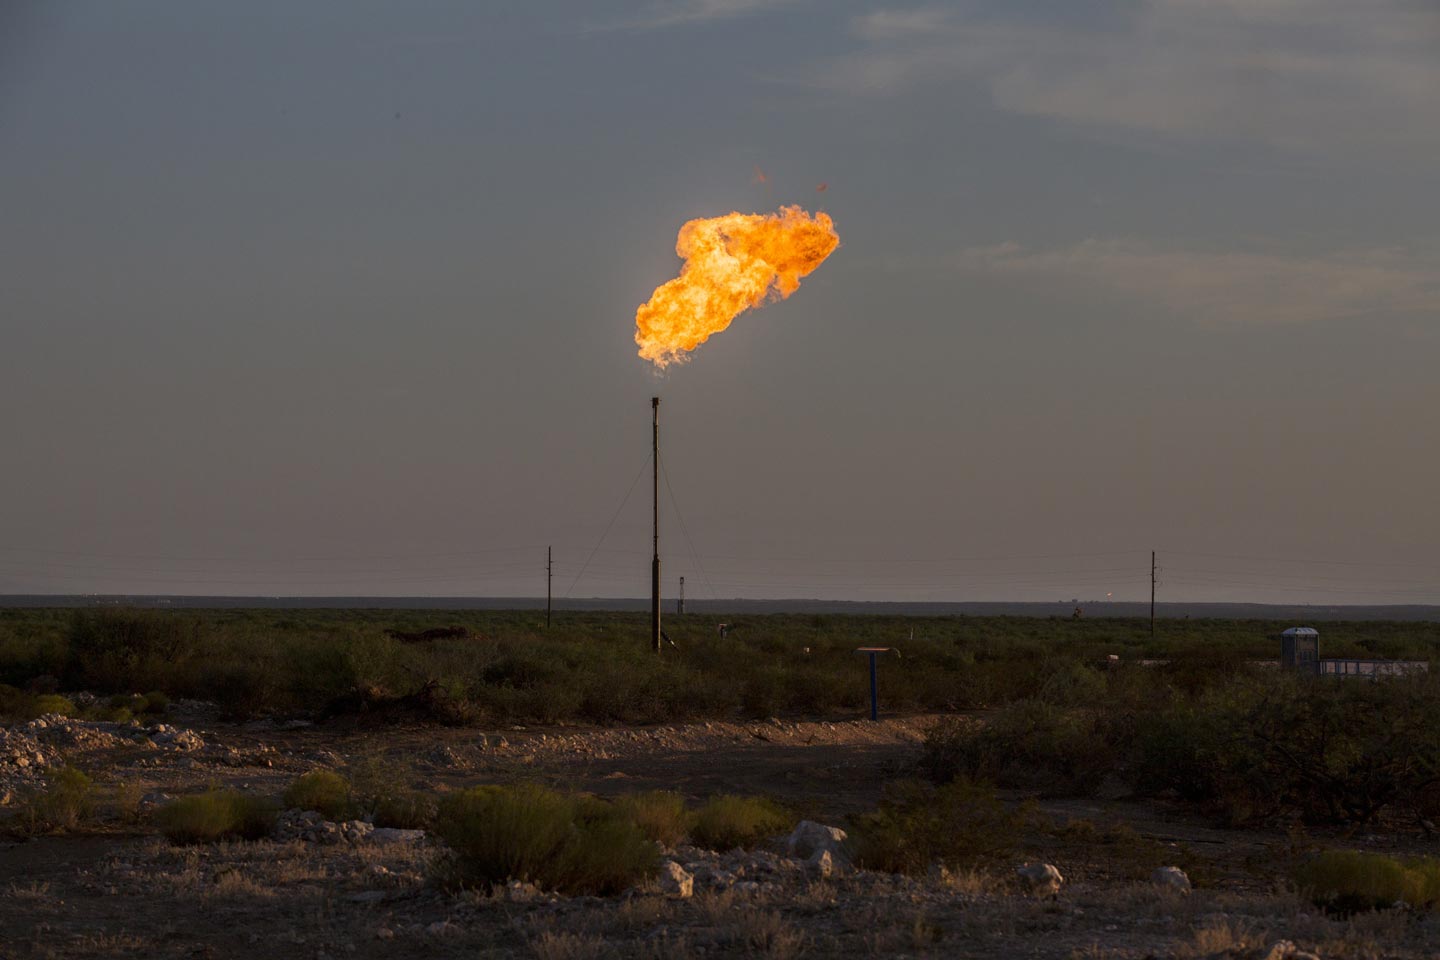 A gas flare near Mentone, Texas. Gas often comes up from reservoirs along with oil. Where there isn’t enough of the fuel to exploit commercially, drillers often vent it directly into the air or burn it off at the wellhead. 